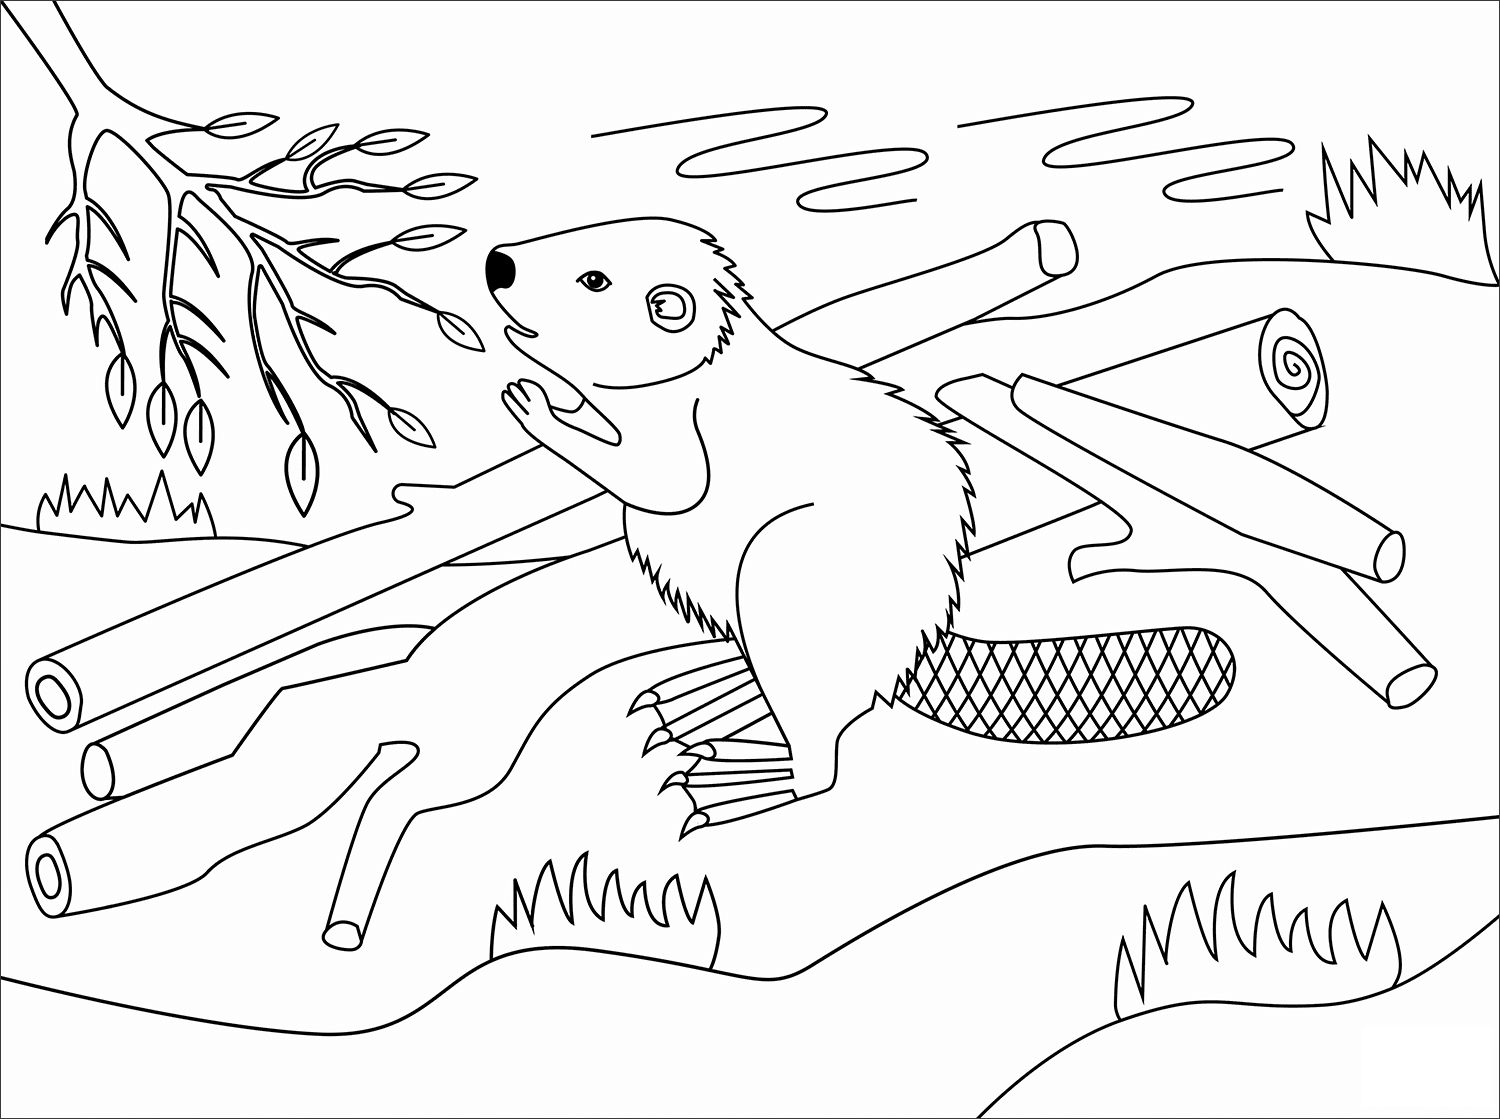 Beaver Animal Simple Coloring Page